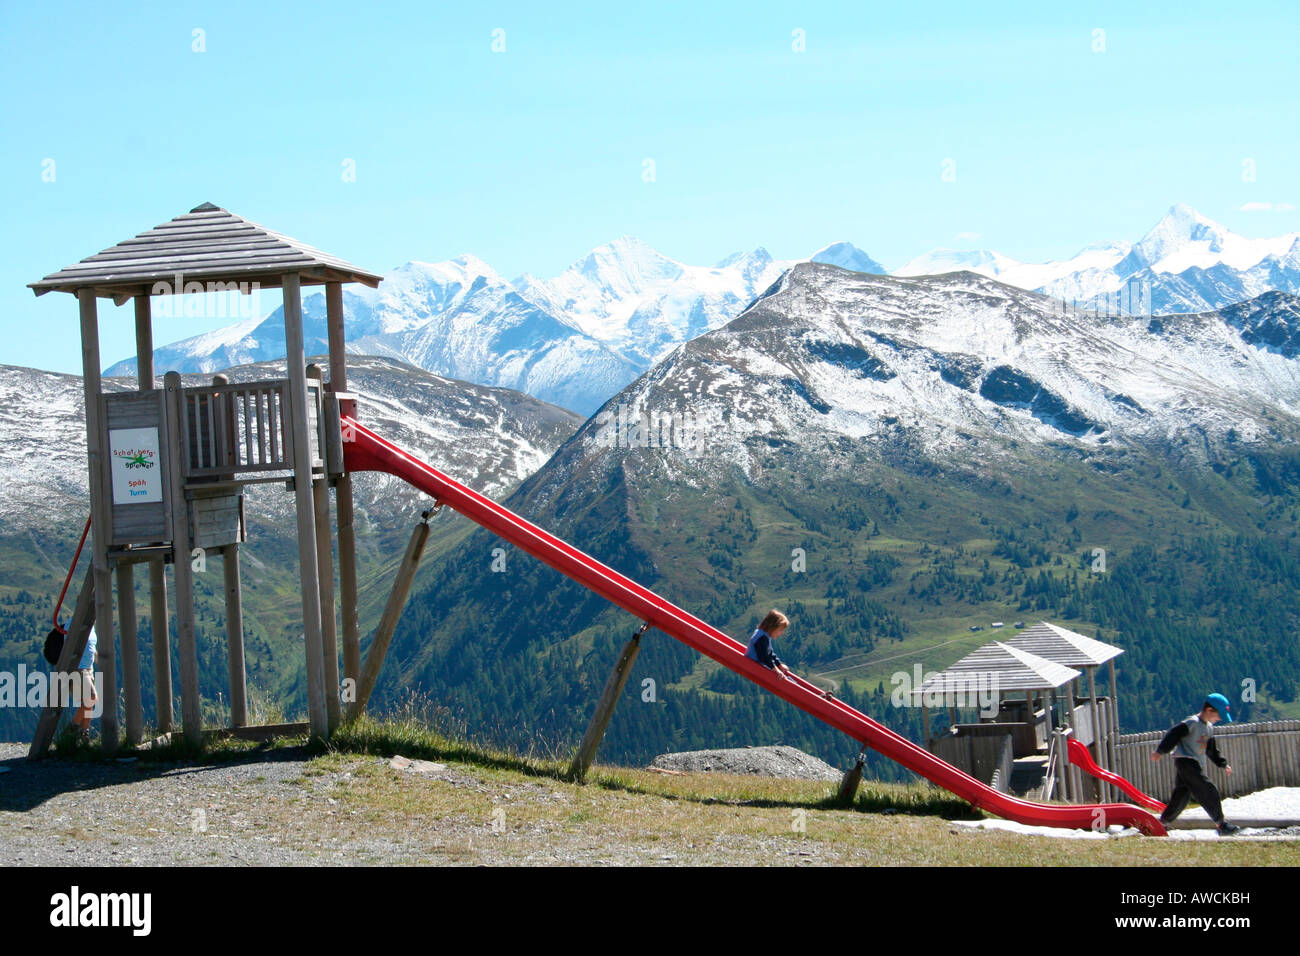 Vacation with children, playground in front of an Alpine panorama, Austria, Europe Stock Photo